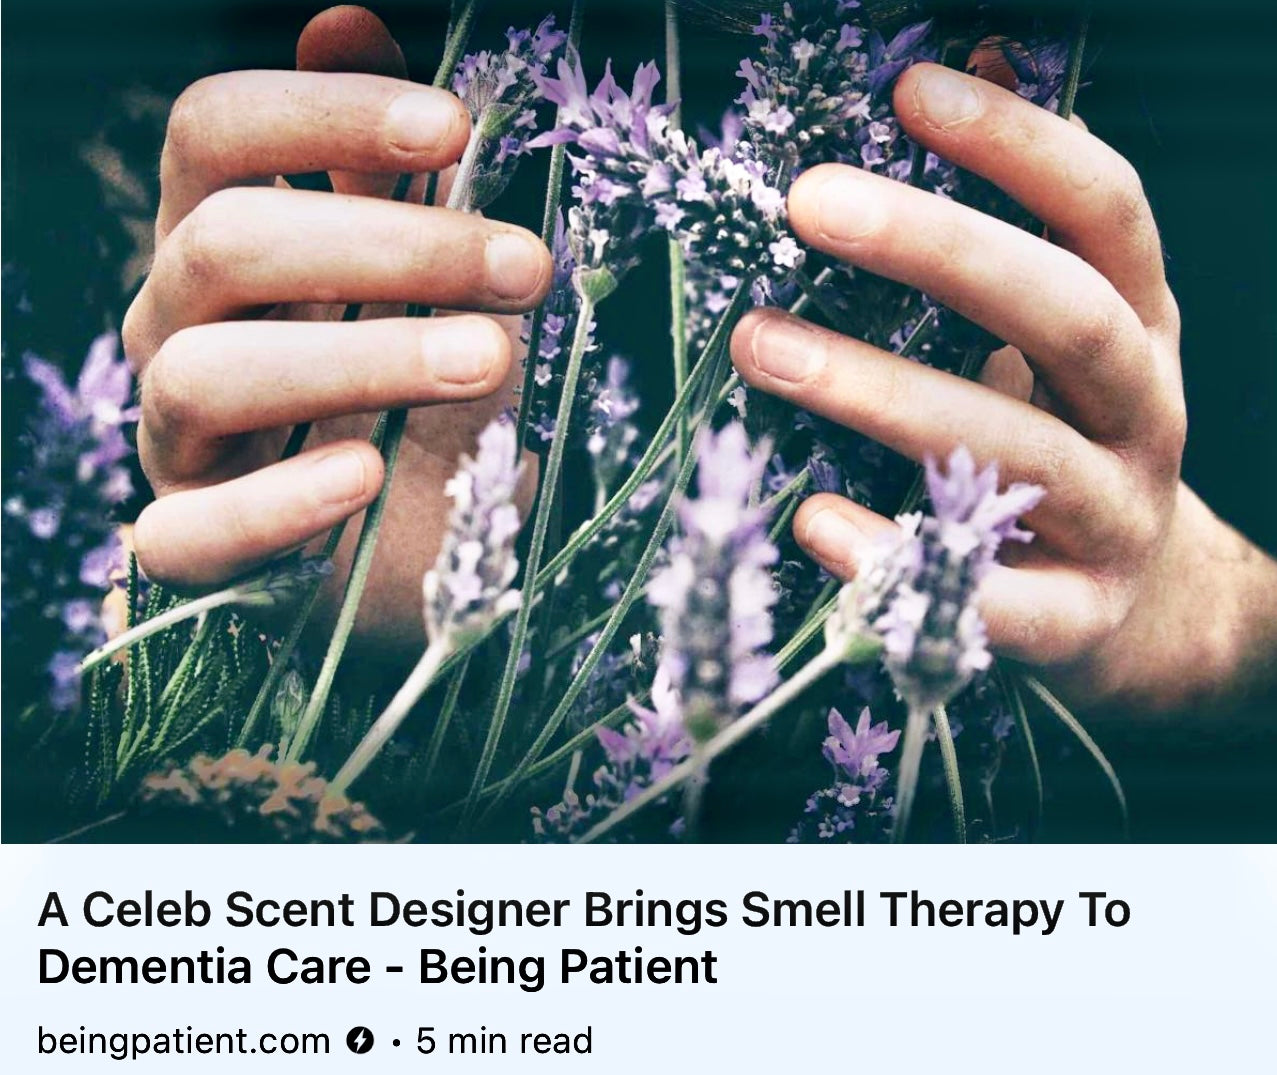 Just Published: A Celeb Scent Designer Brings Smell Therapy To Dementia Care - Being Patient